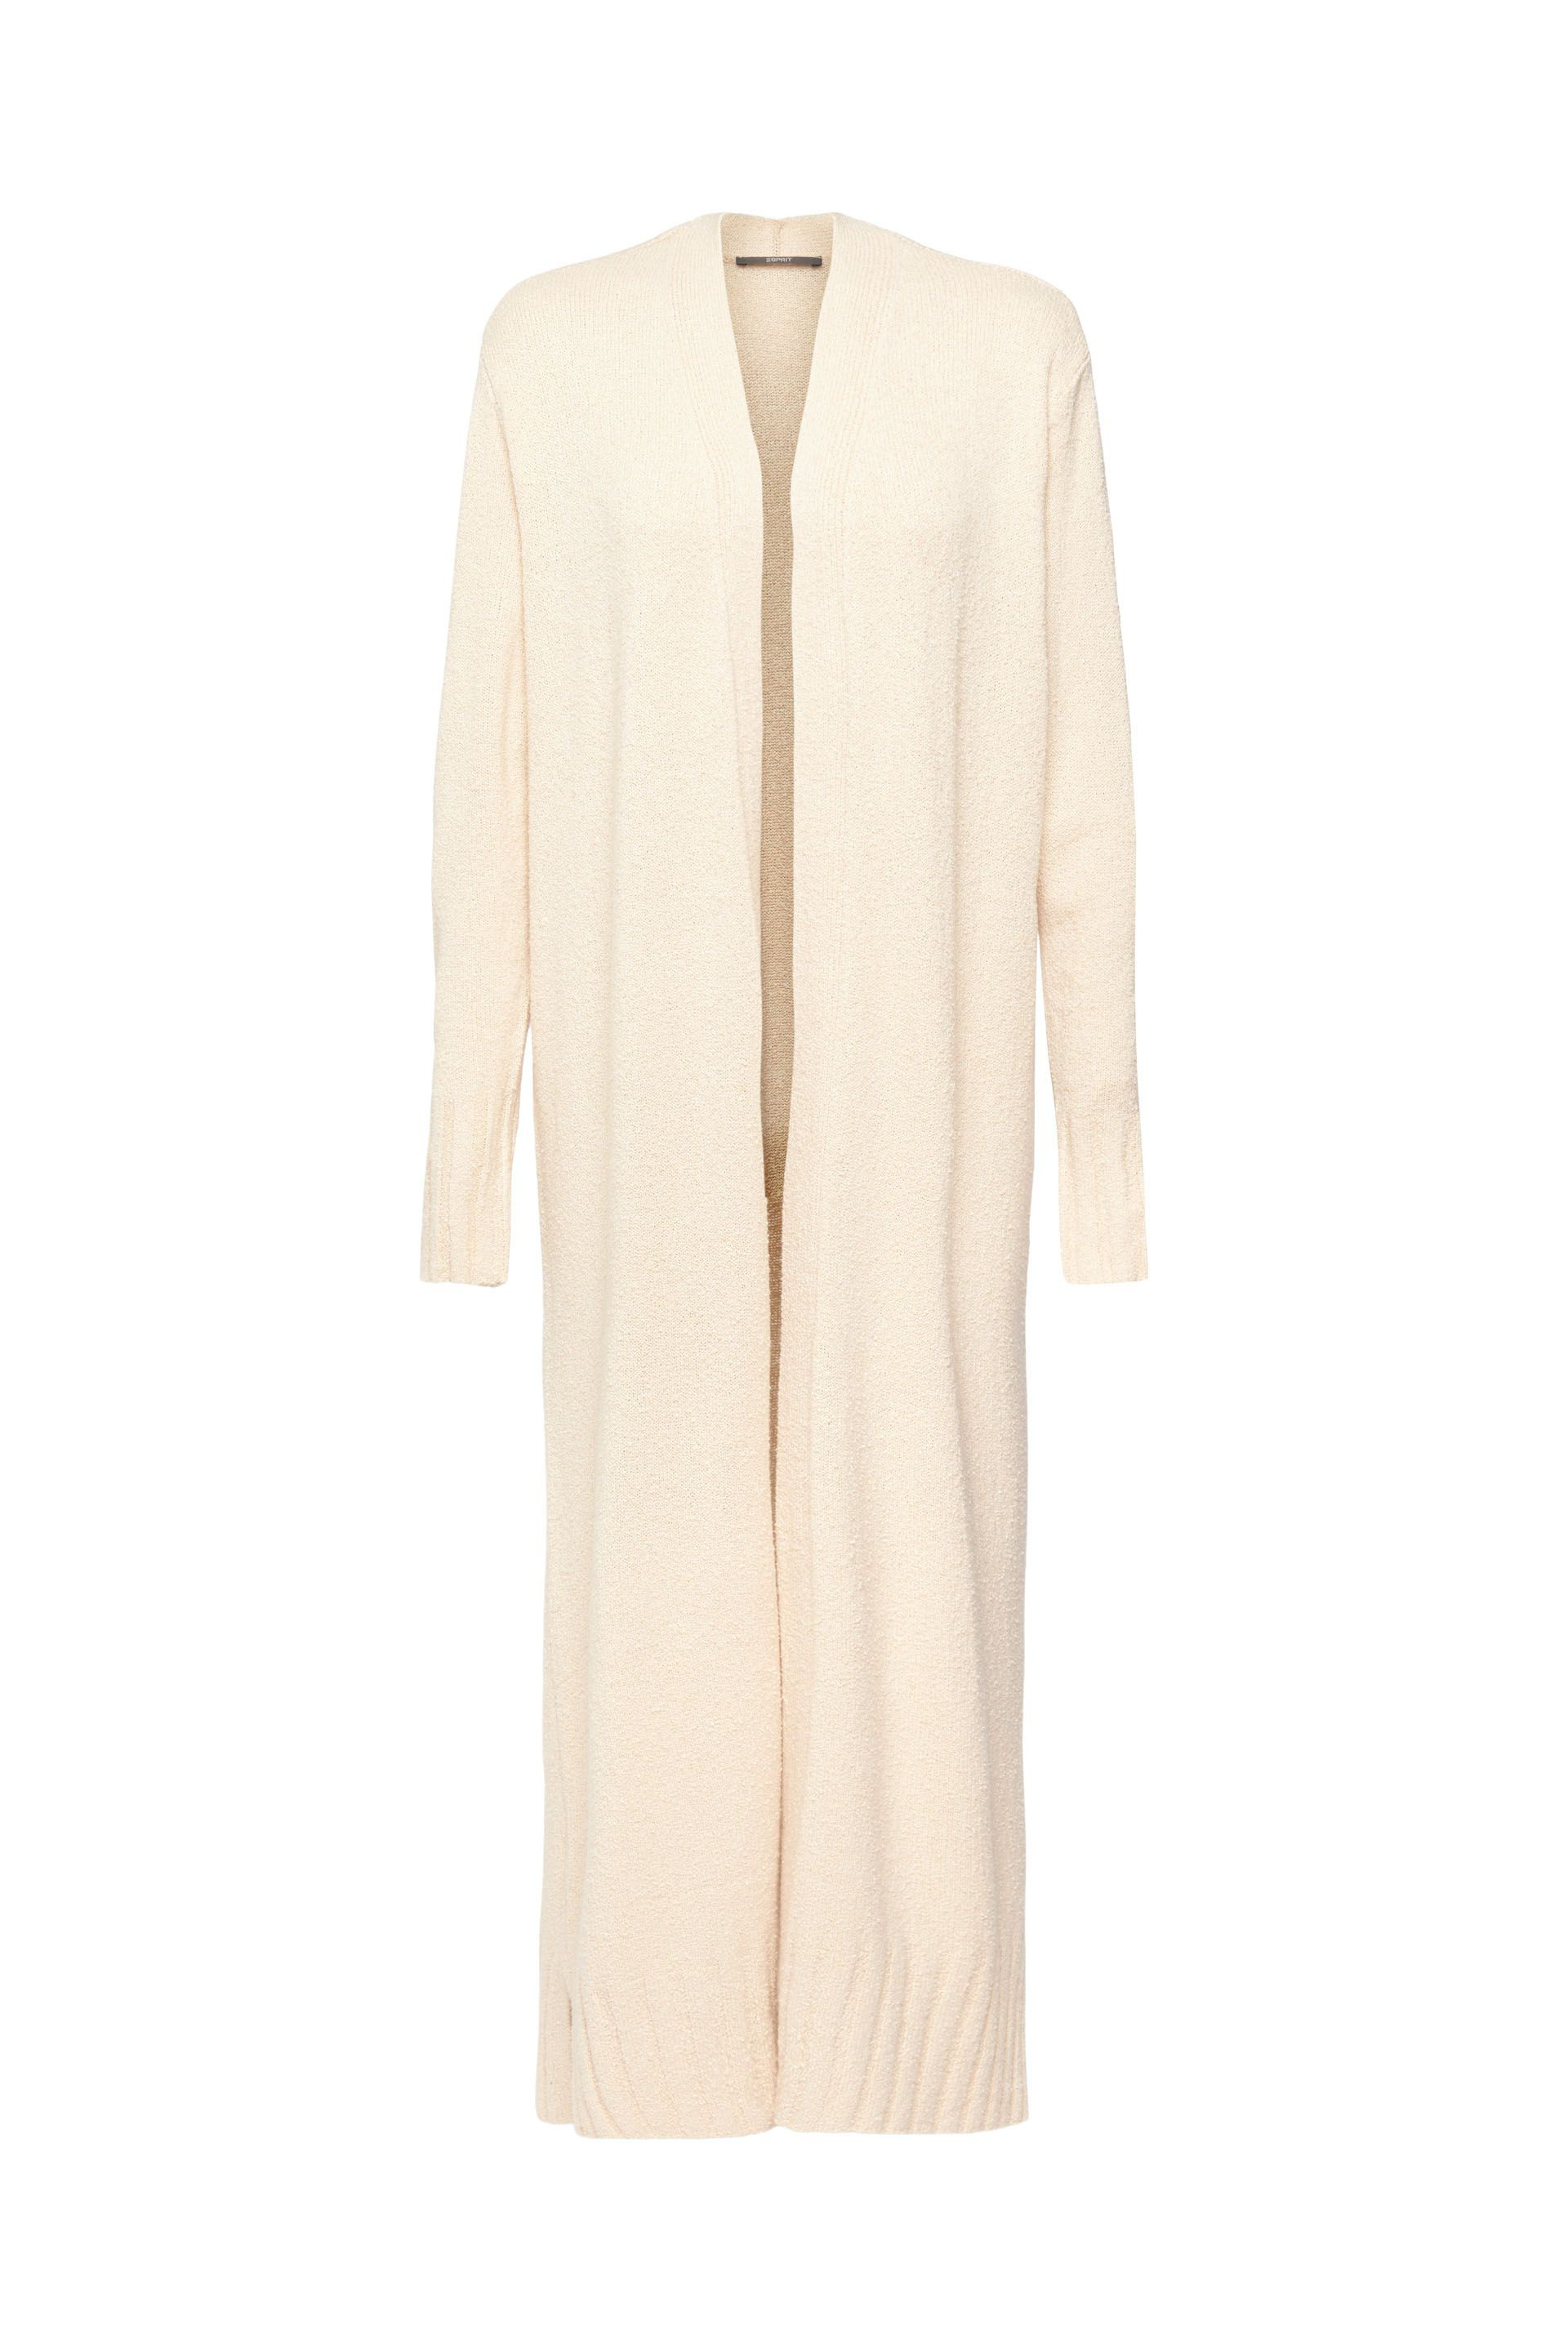 Cardigan lungo in maglia, Beige, large image number 0